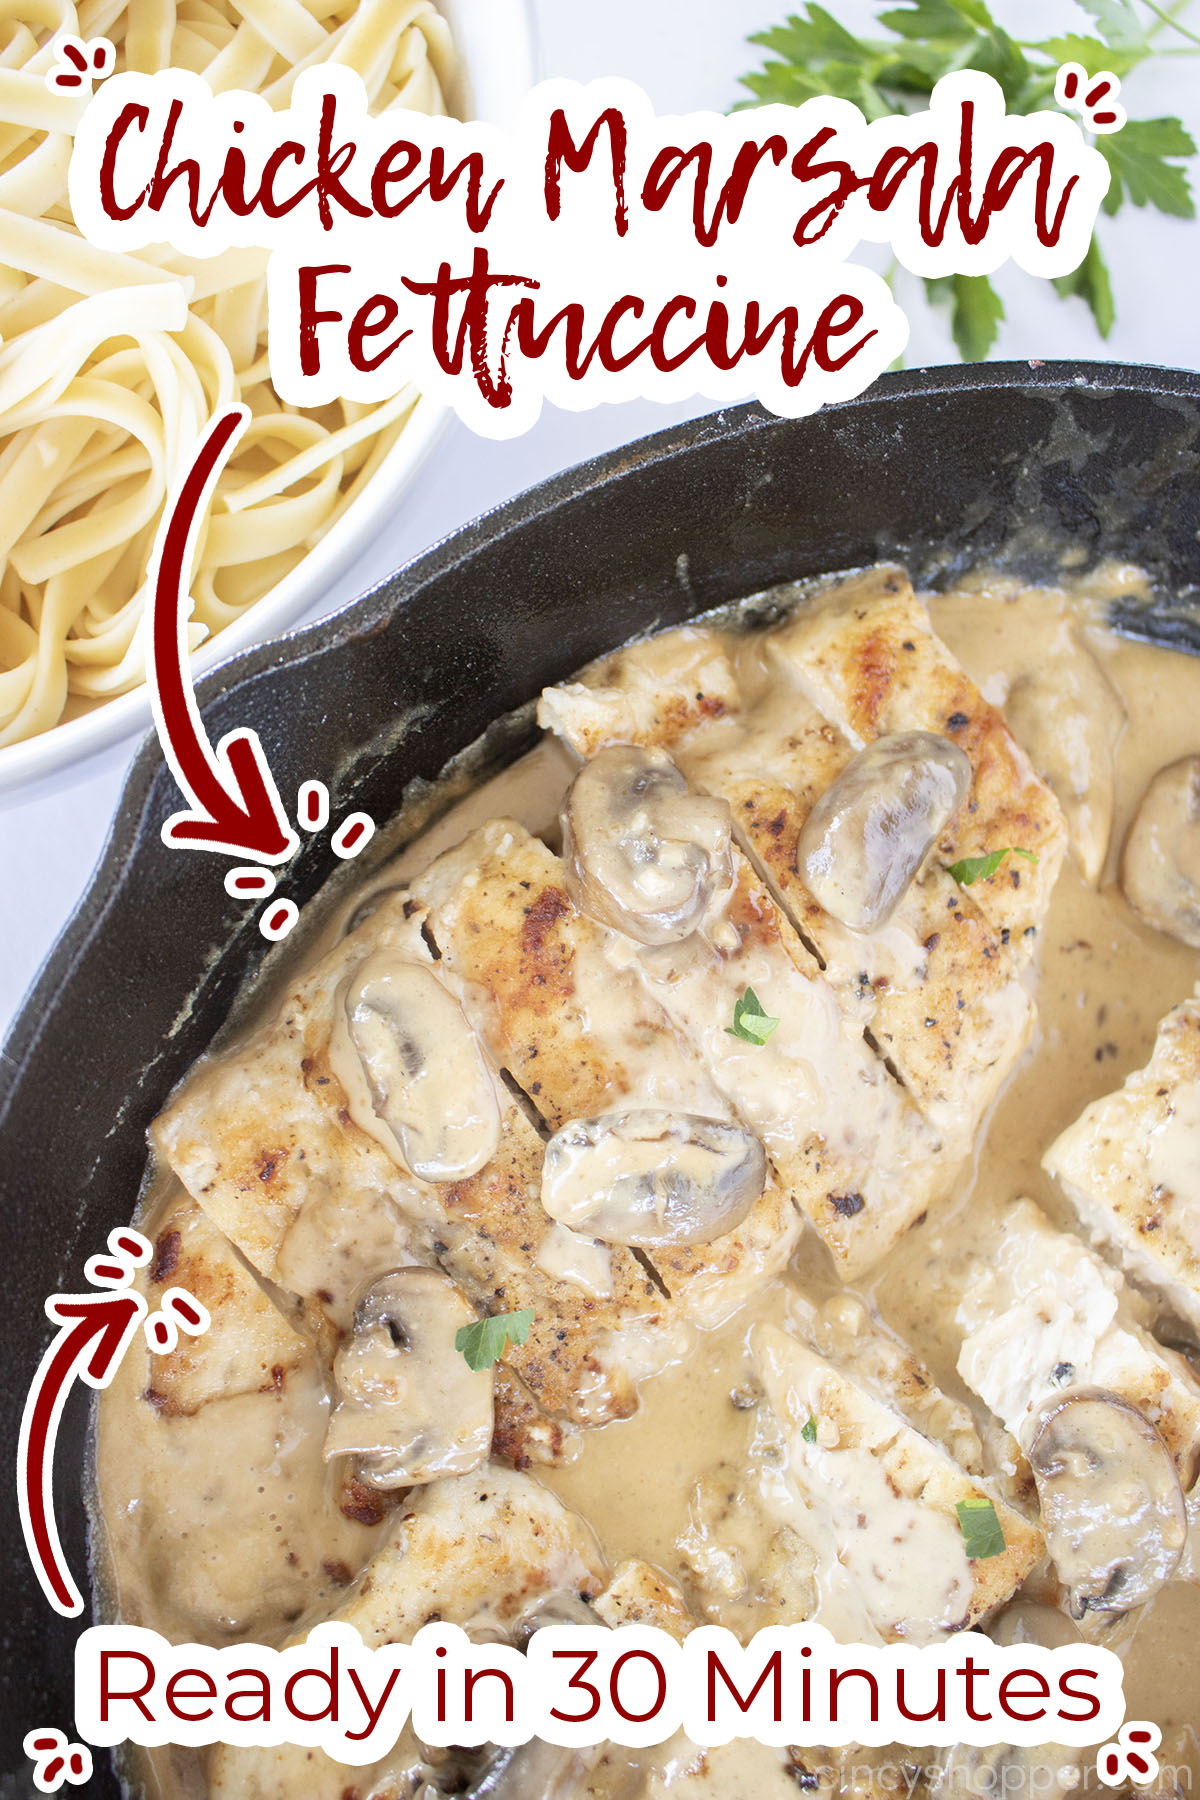 Text on image Chicken Marsala Fettuccine Ready in 30 Minutes.